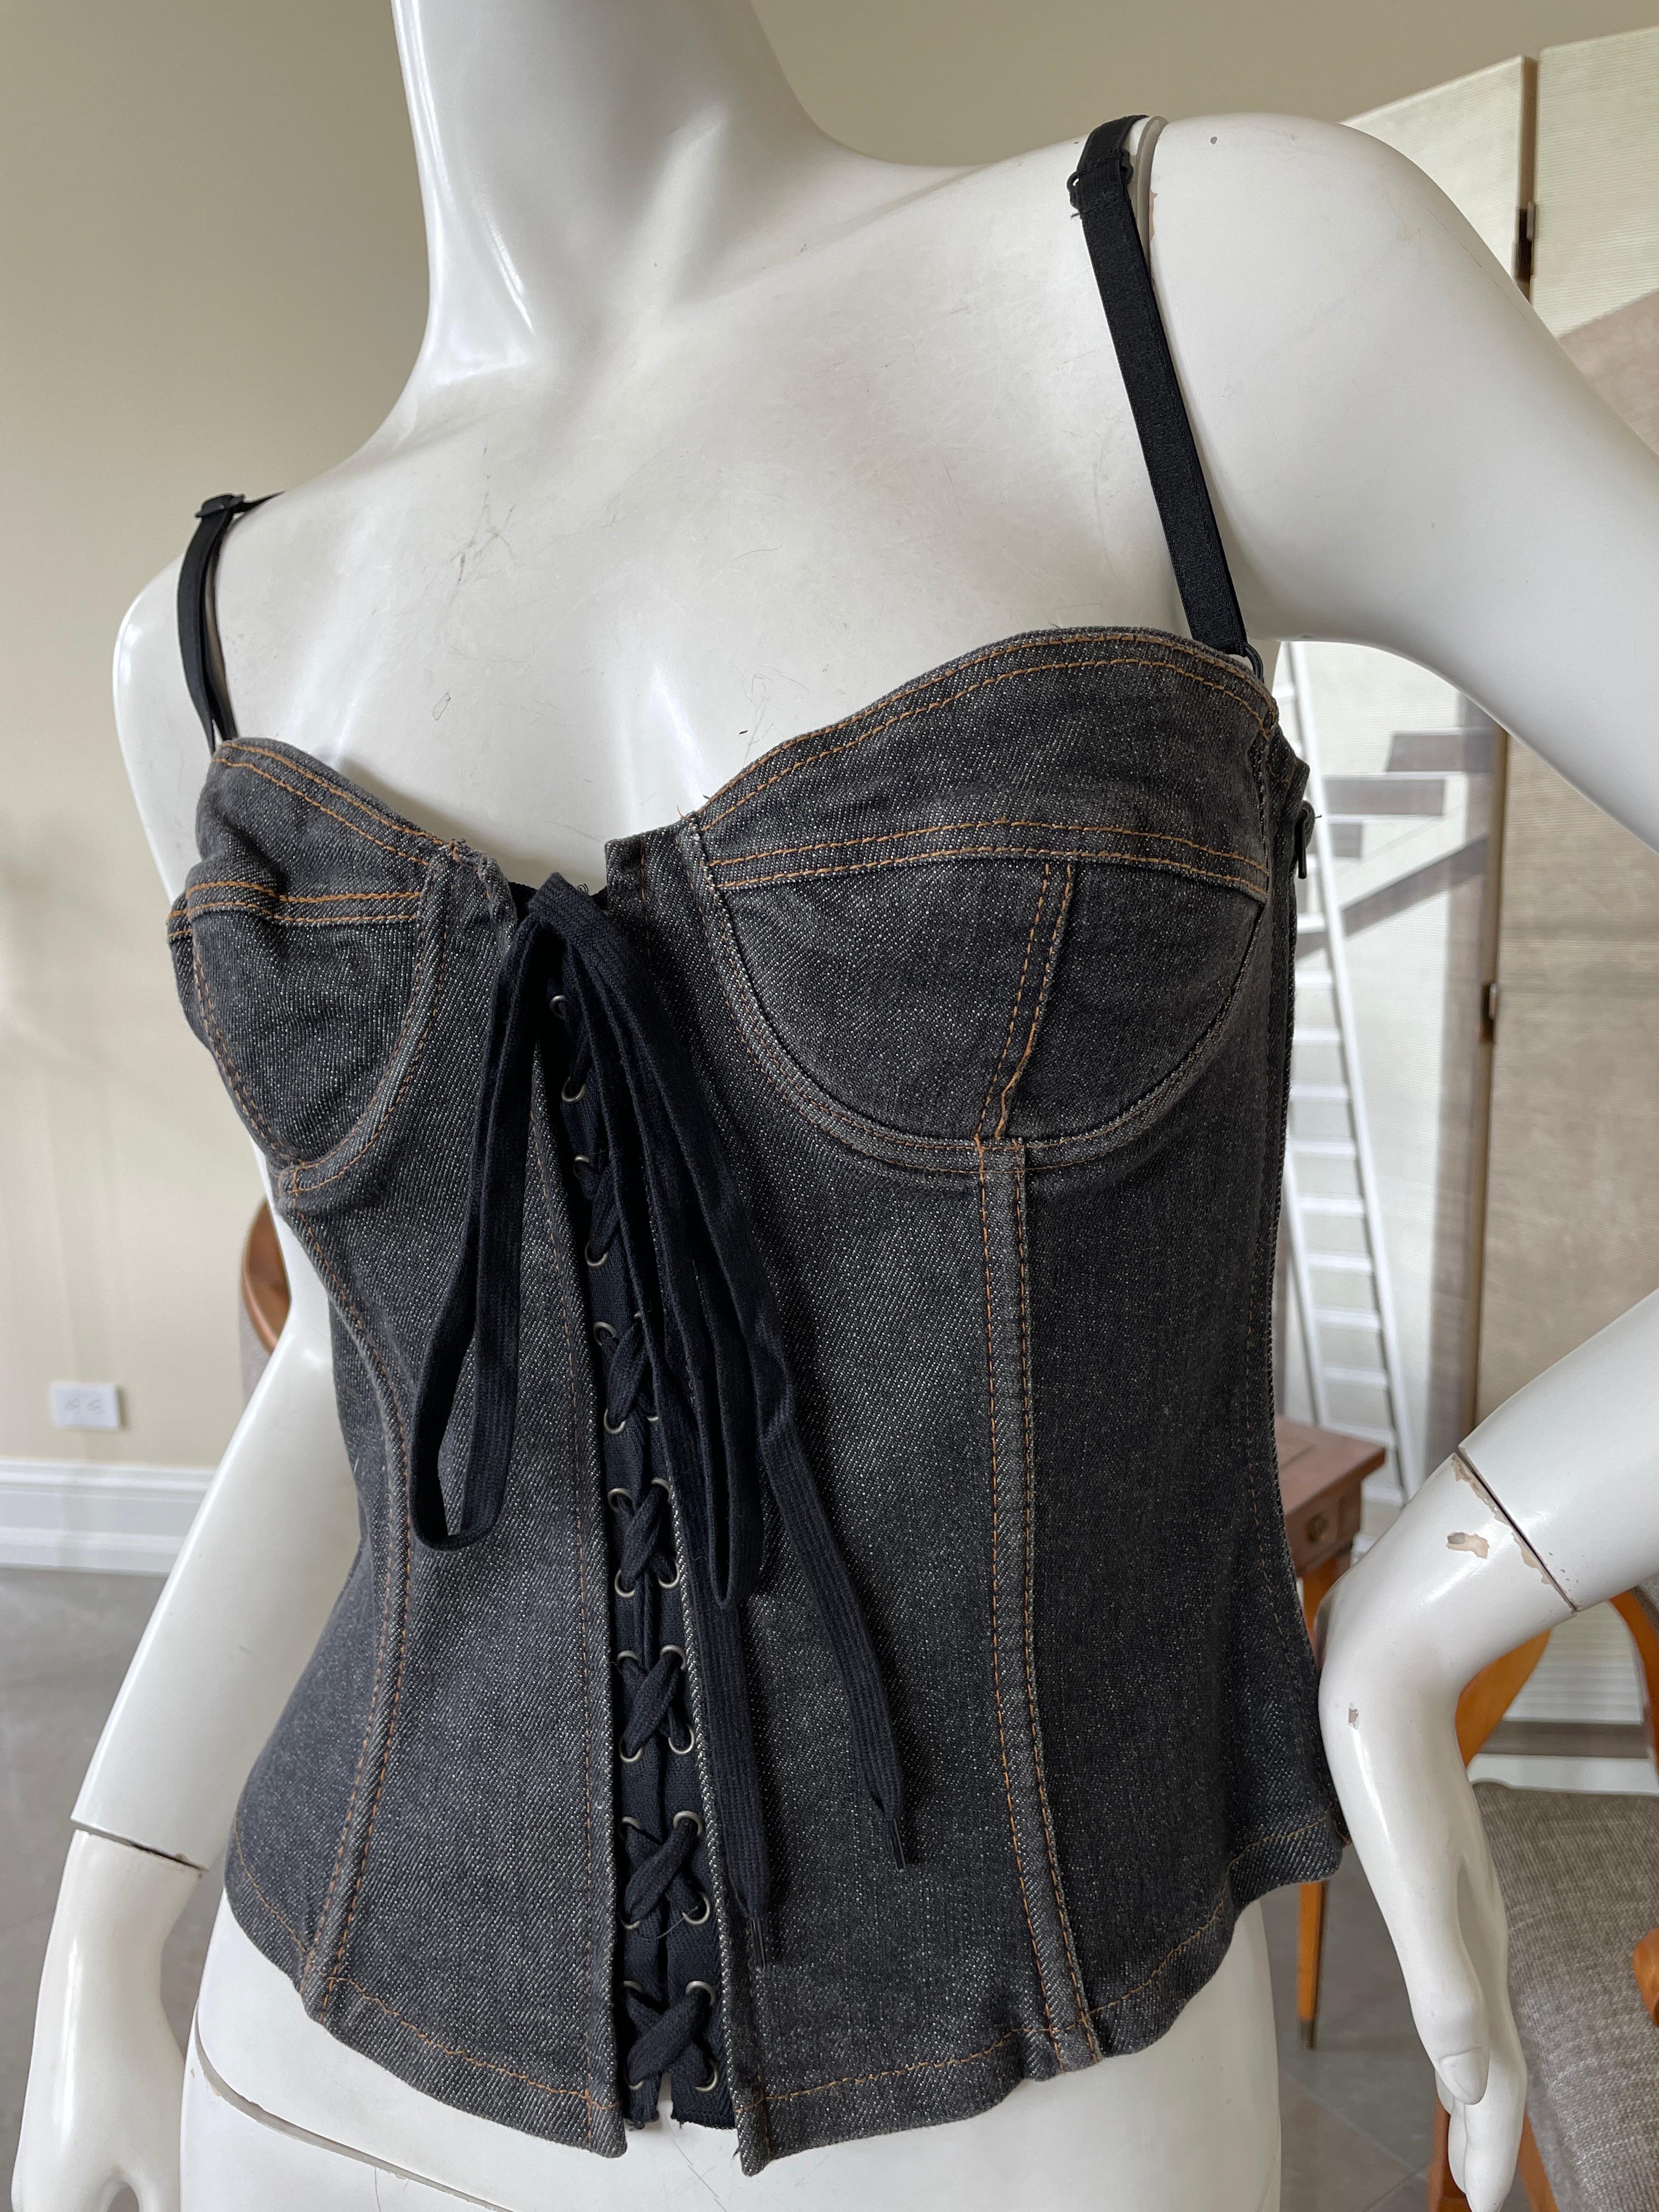 Women's Dolce & Gabbana for D&G Sexy Gray Denim Corset with Lace Up Details. For Sale